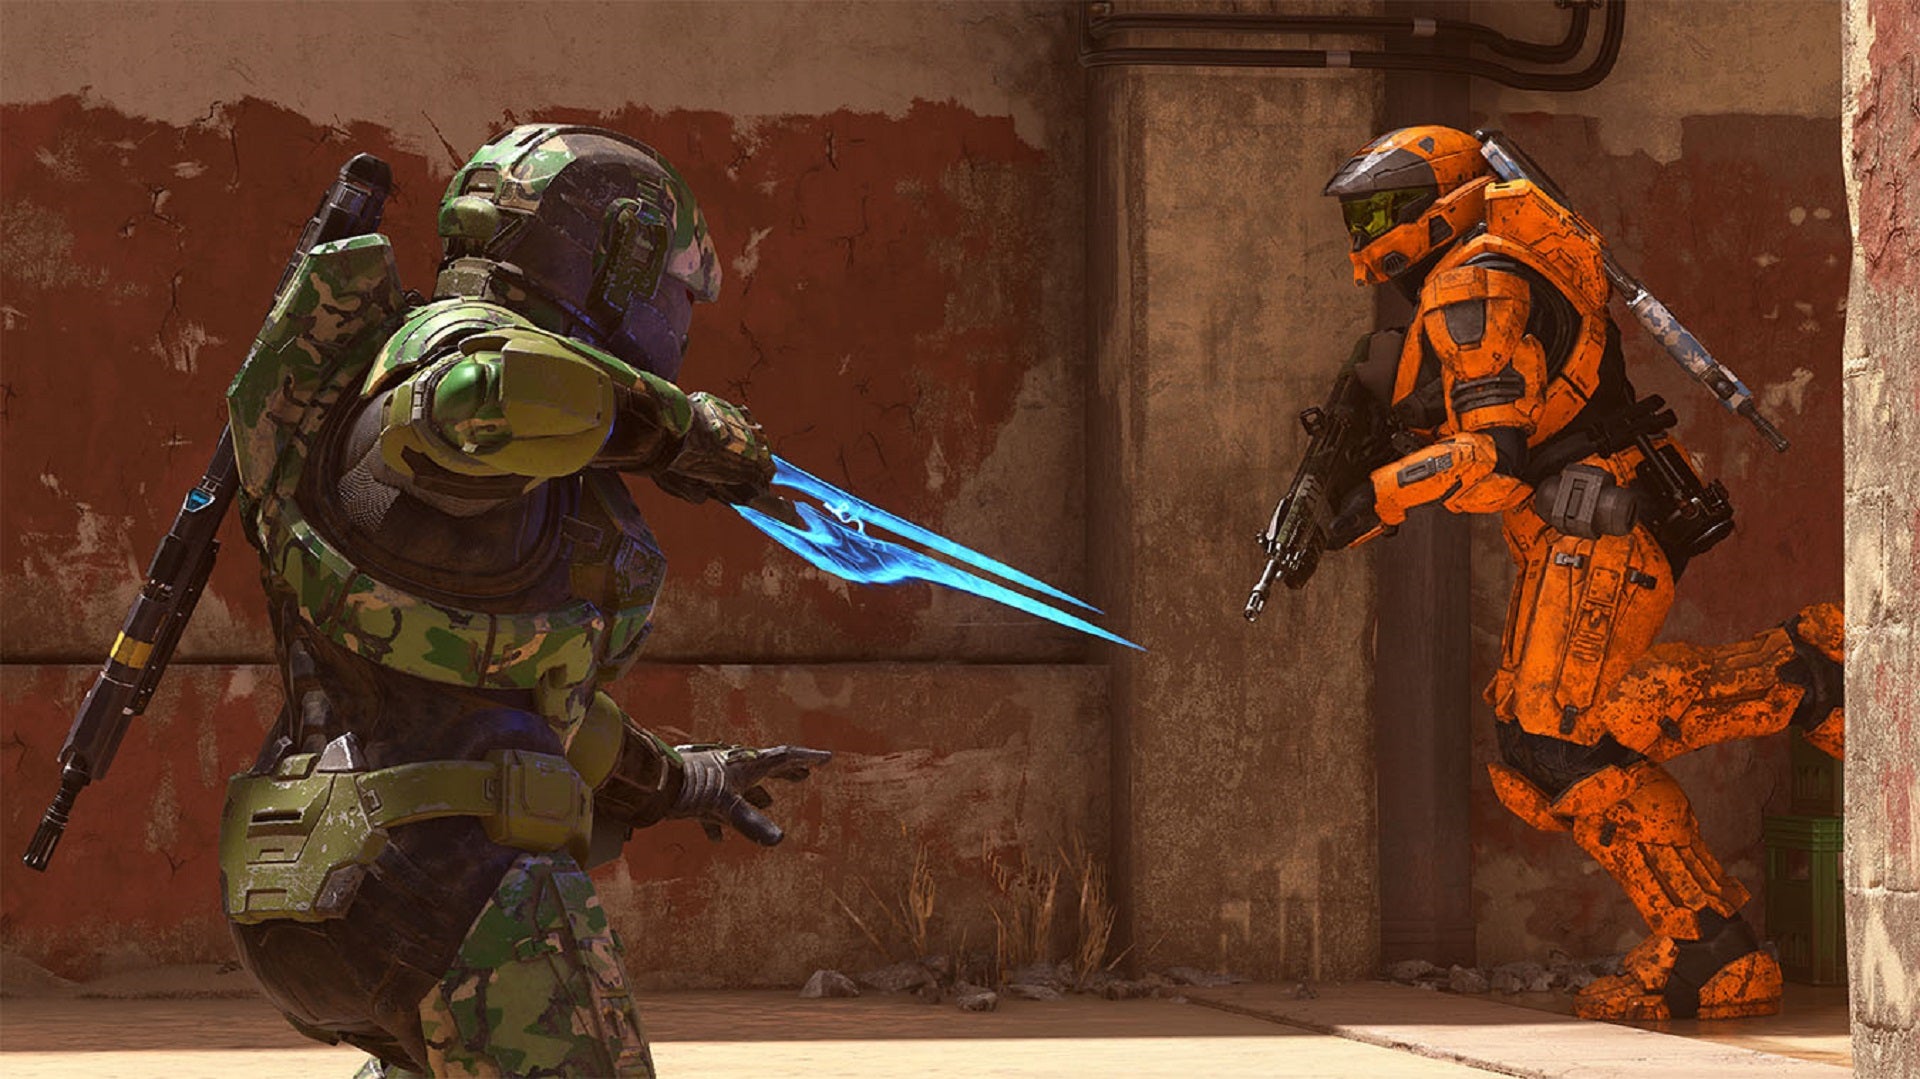 Two Spartans — one in green, one in orange armour — face off against each other in Halo Infinite multiplayer.